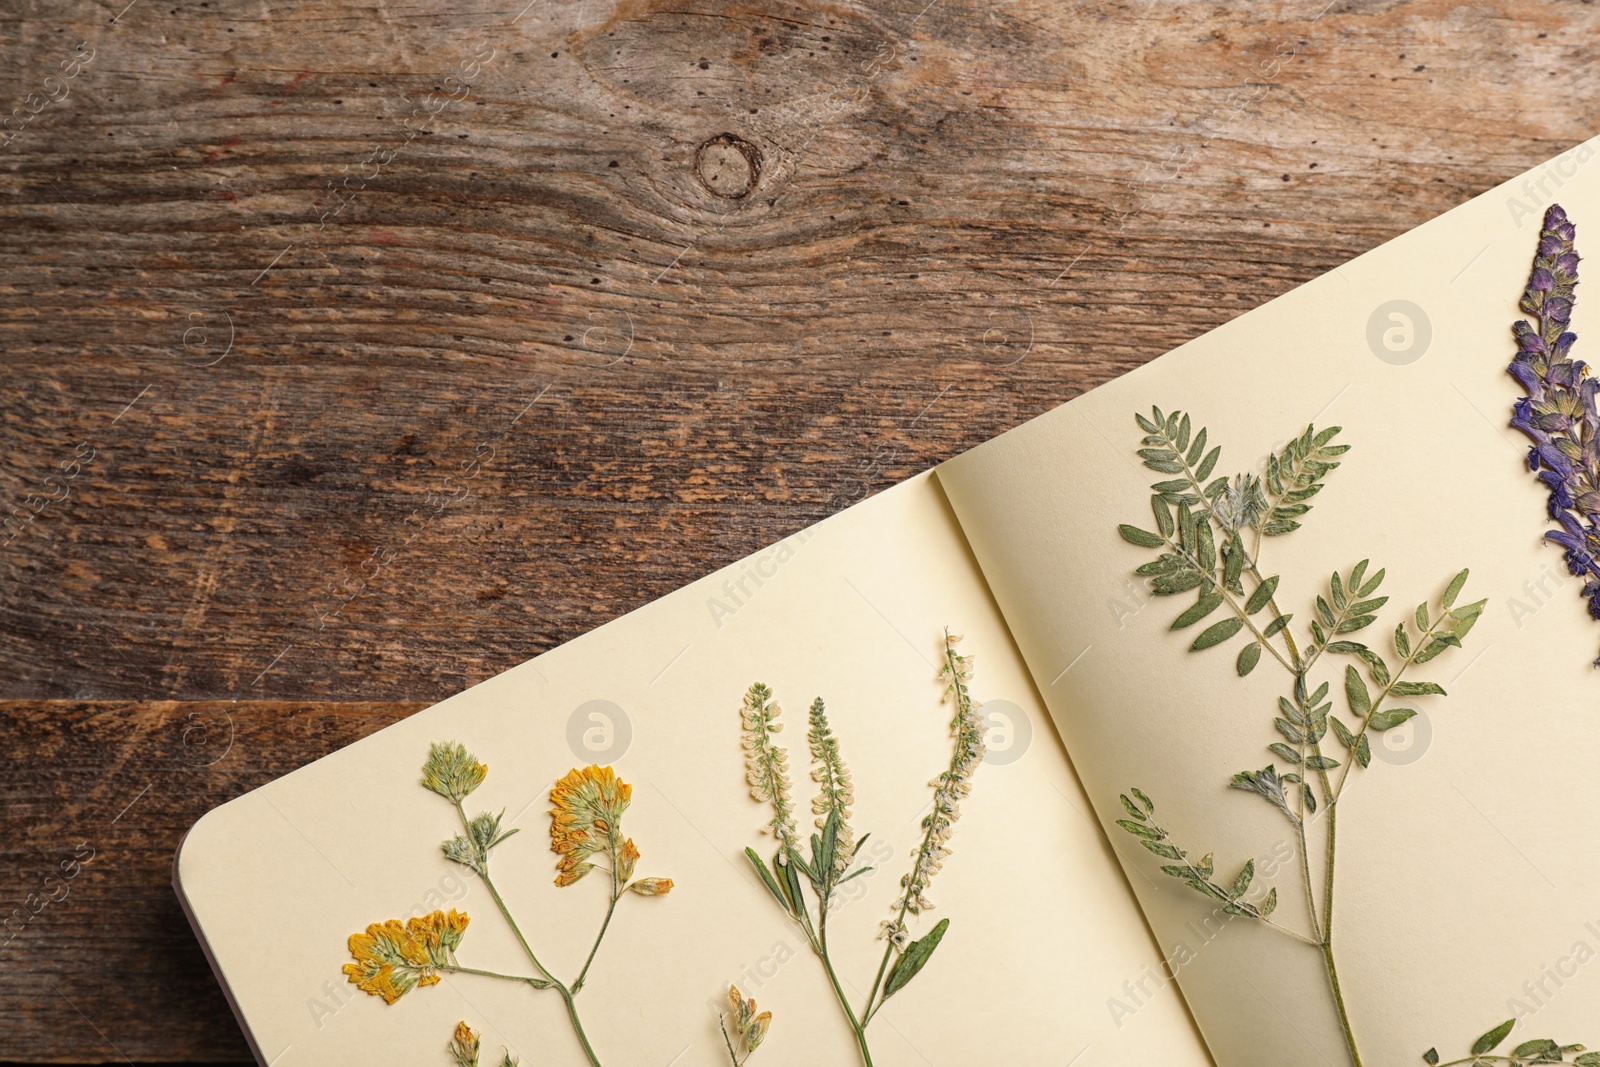 Photo of Wild dried meadow flowers in notebook on wooden background, top view